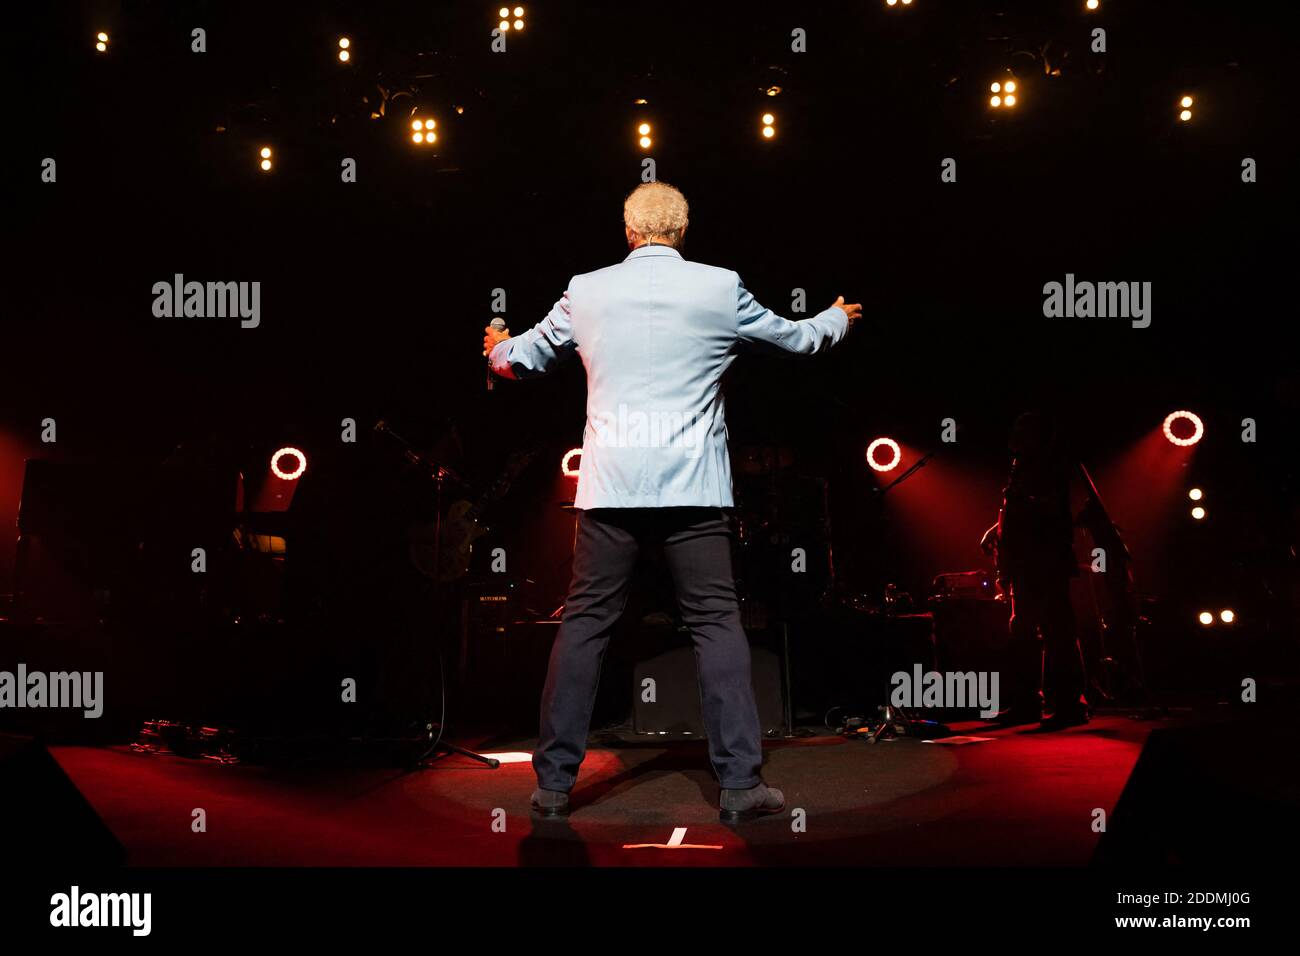 Tom Jones performing in concert as part of the 53nd Montreux Jazz Festival  in Montreux, Switzerland on July 09, 2019. Photo by Loona/ABACAPRESS.COM  Stock Photo - Alamy